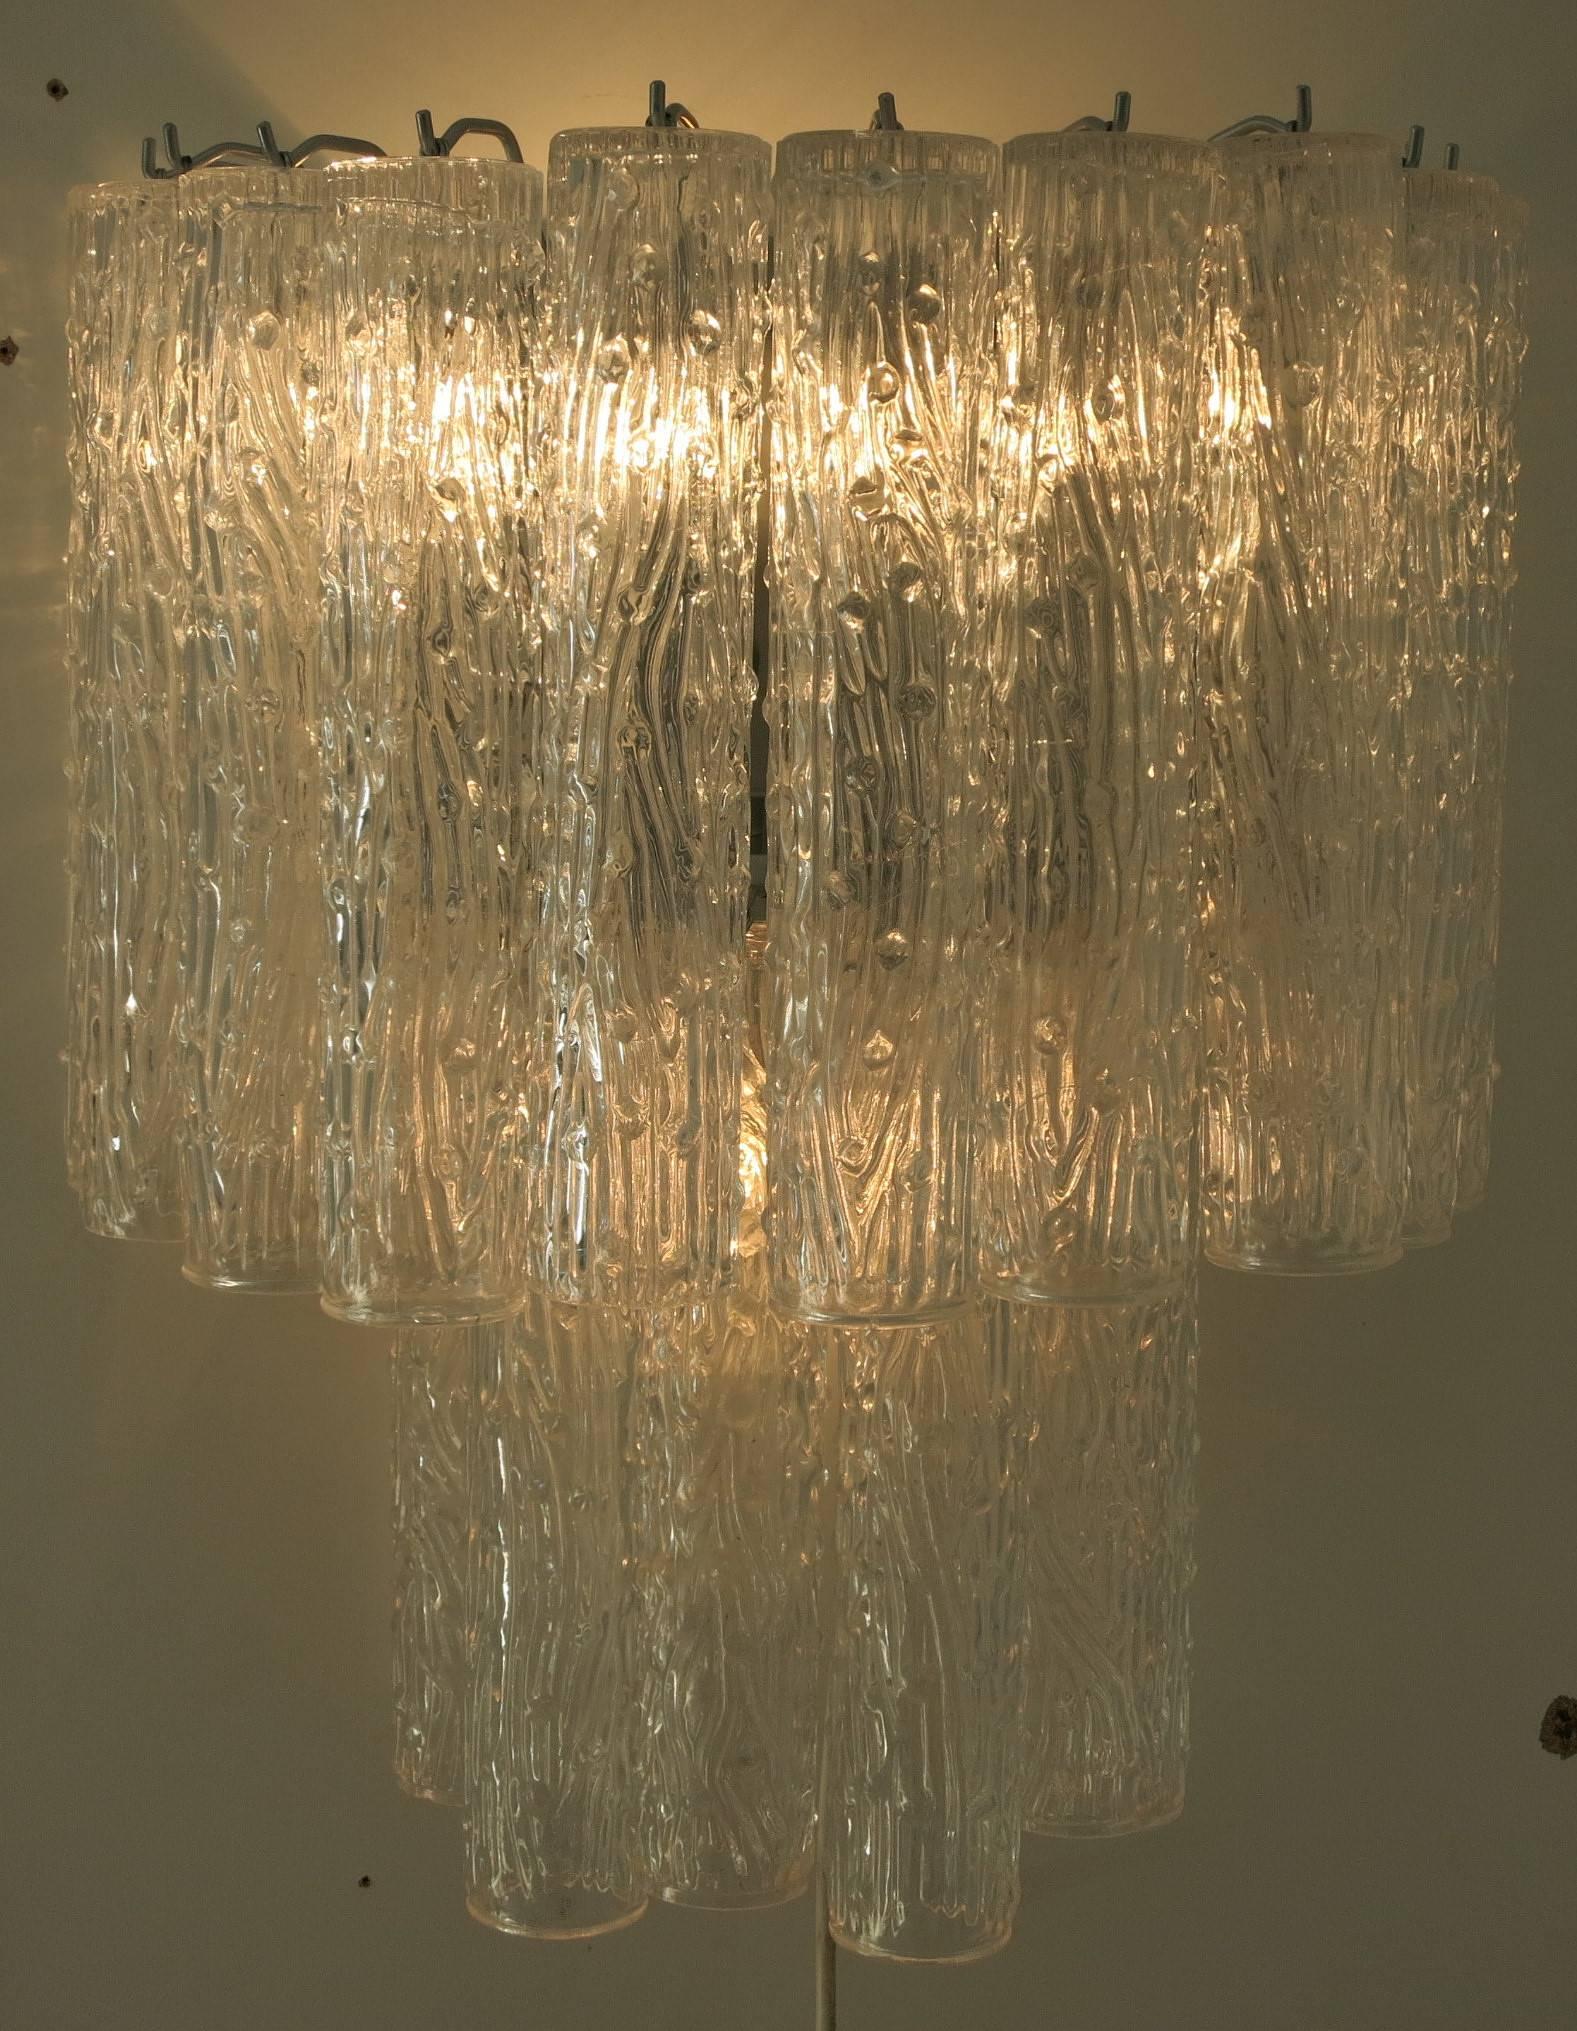 Original vintage pair of Italian wall lights with 17 clear Murano glass tubes blown in Corteccia technique to resemble bark-like patterns mounted on chrome metal frames / Designed by Venini, circa 1960’s / Made in Italy
3 lights / E12 or E14 type /